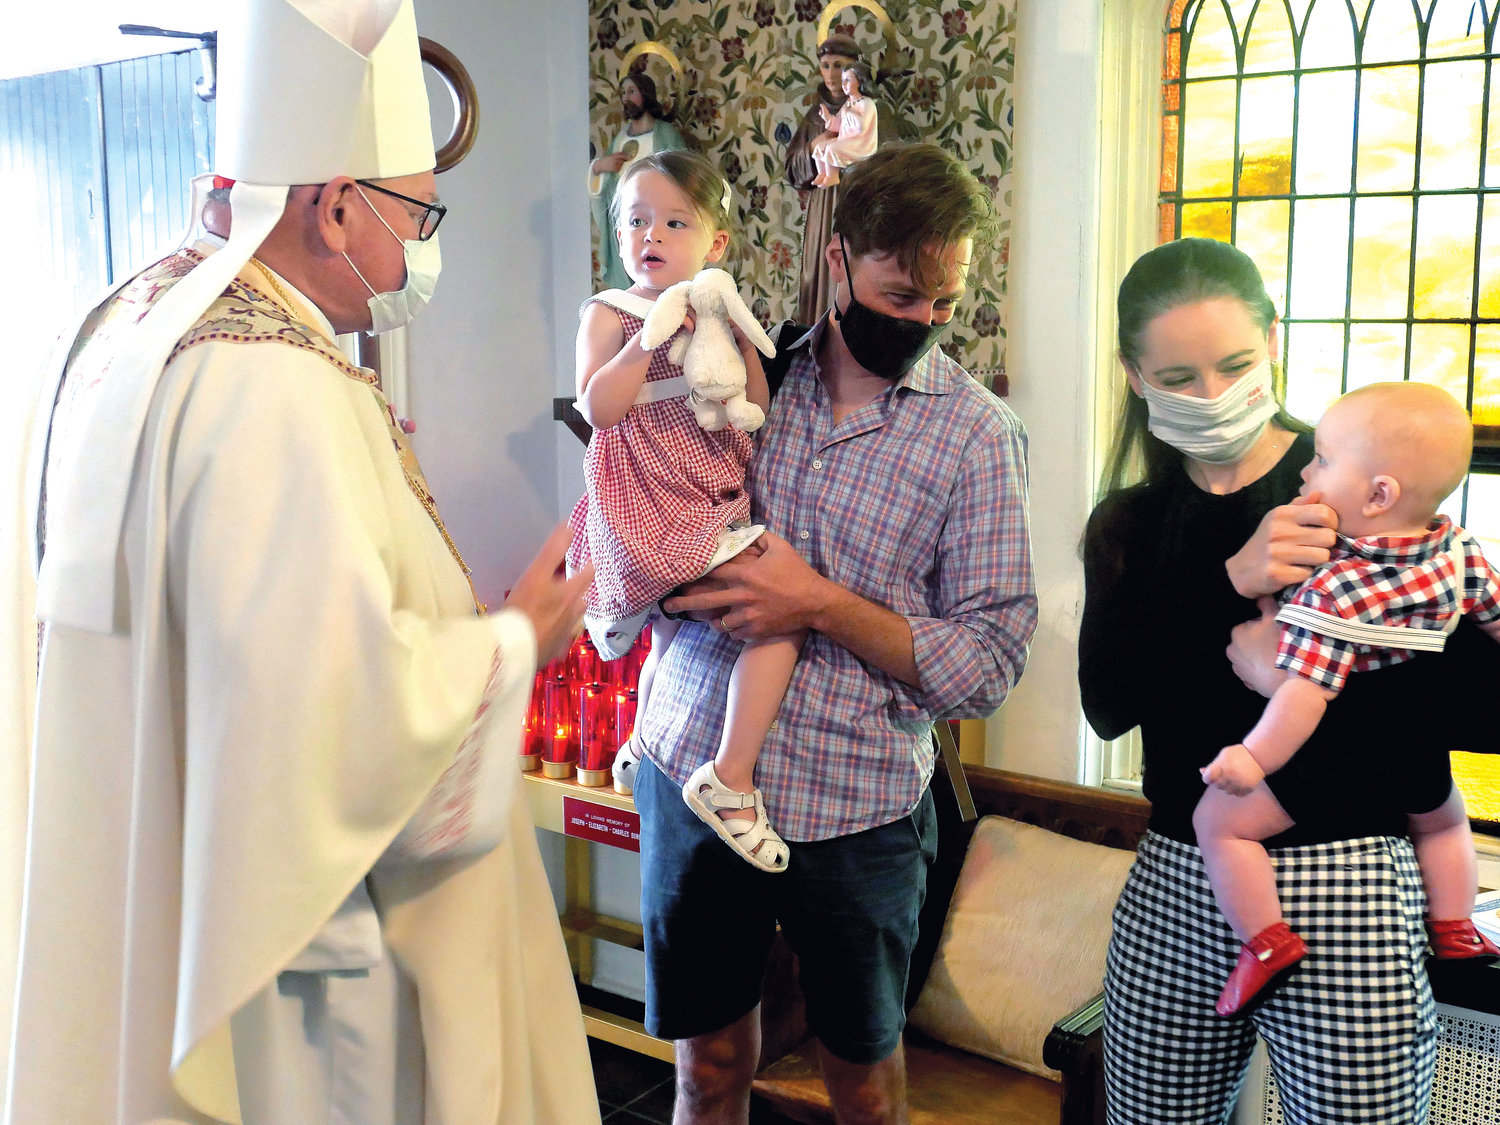 Cardinal Dolan greets Tom and Mary O’Brien and their children, 2-year-old Mary and 7-month-old William, after the Mass the cardinal offered July 19 to mark the 125th anniversary of Our Lady of Mount Carmel Church in Tuxedo.